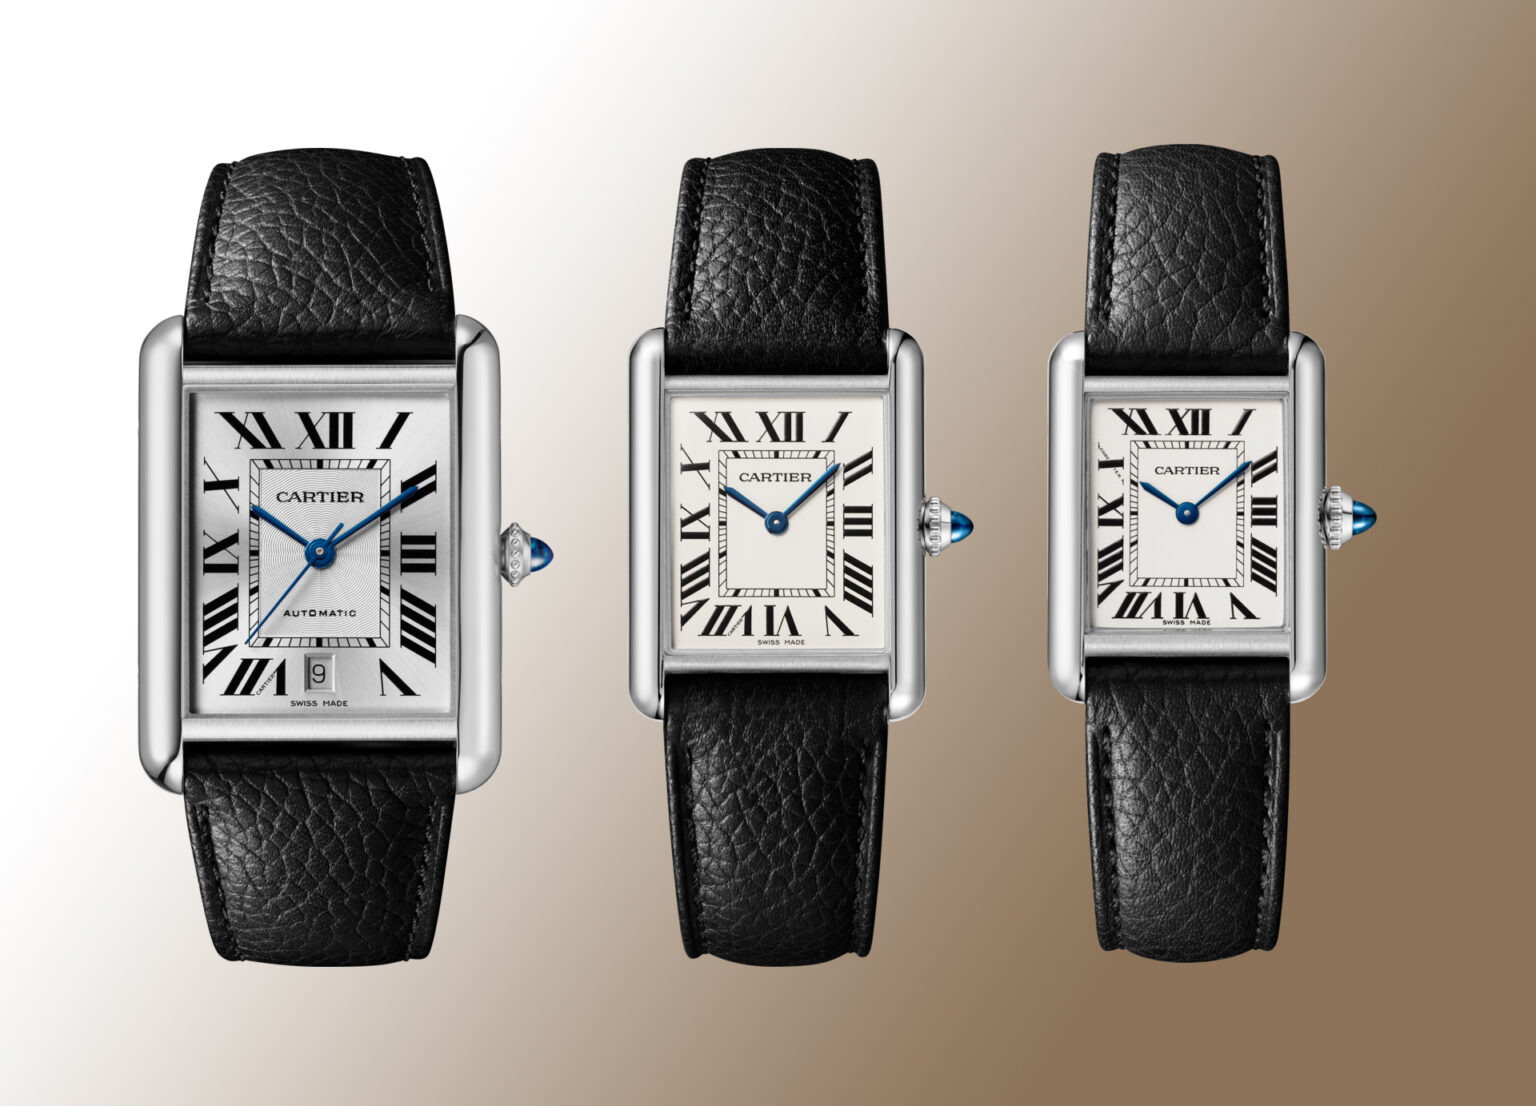 The New Must de Cartier Tank Comes in 3 Case Sizes | - Articles